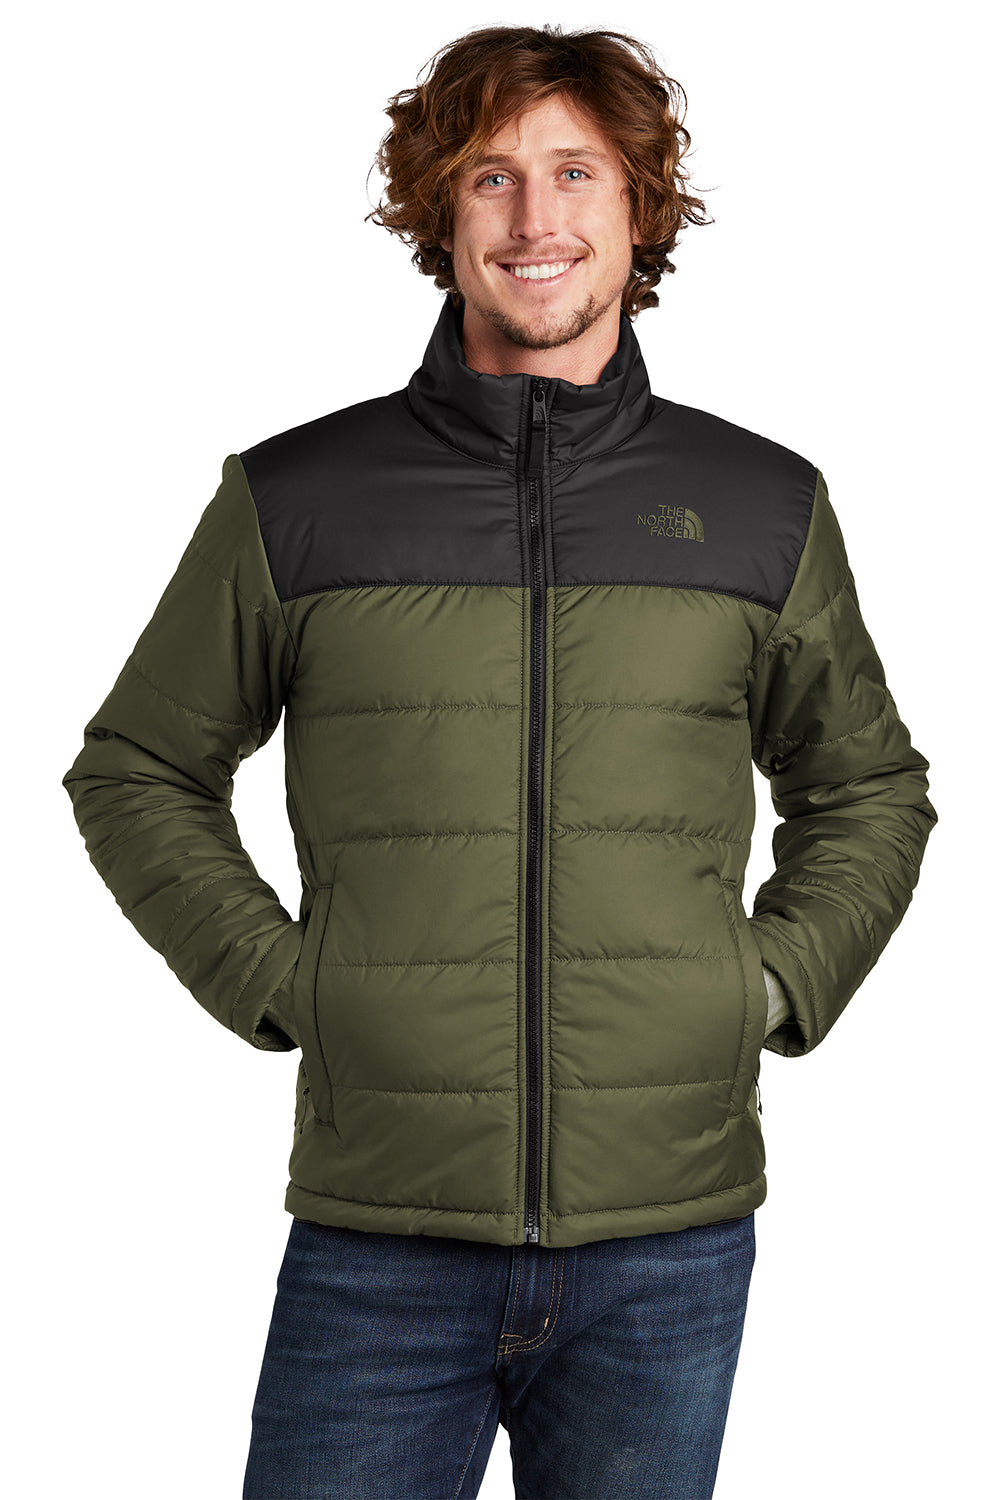 The North Face NF0A7V6J Mens Everyday Insulated Full Zip Jacket Burnt Olive Green Front